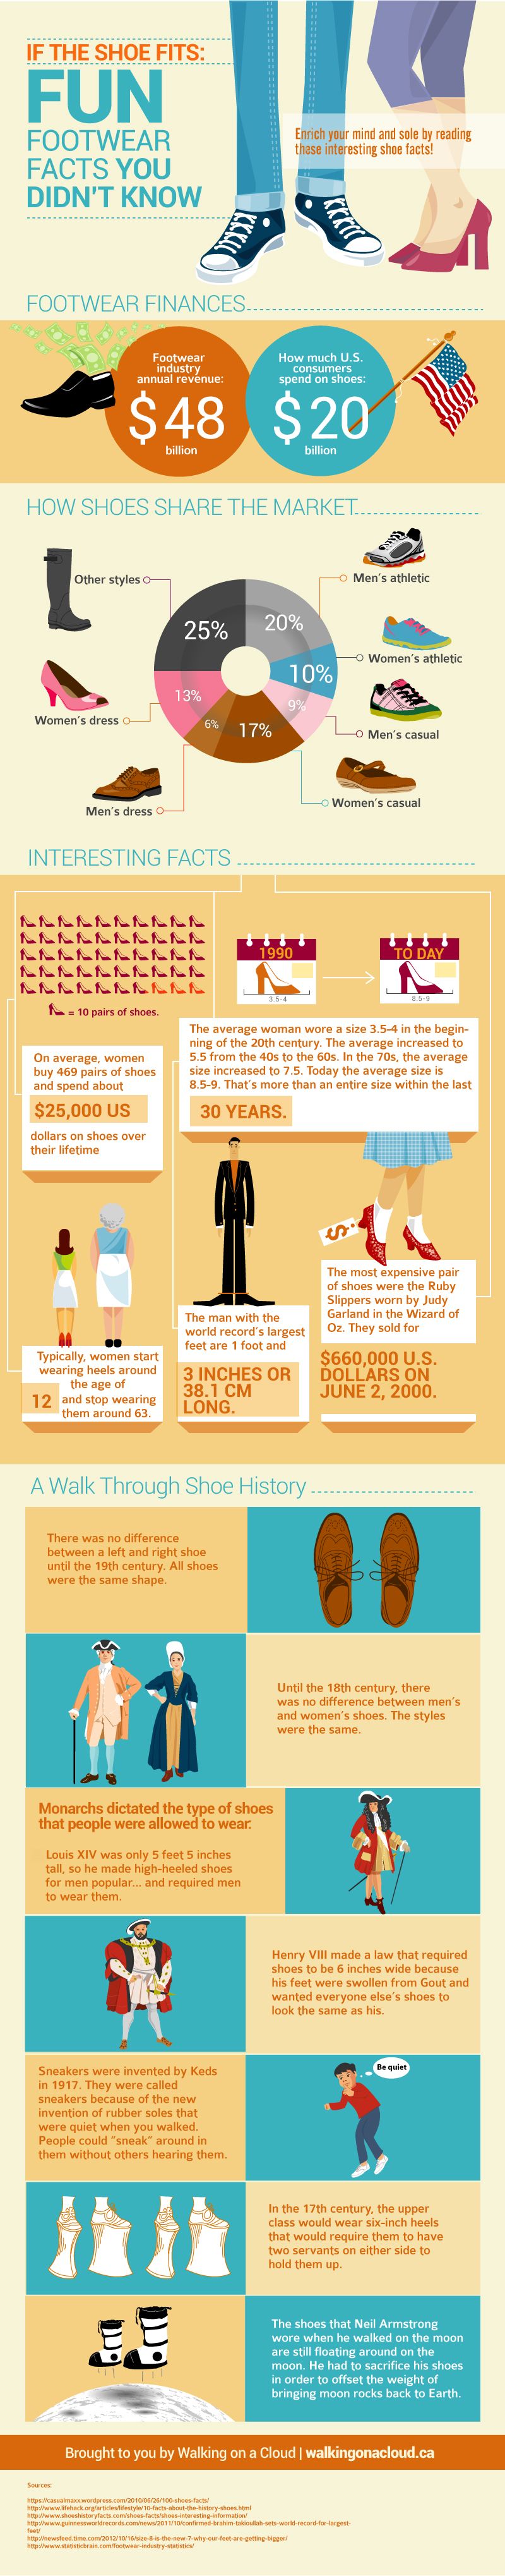 1411_infographic-shoe facts_v2